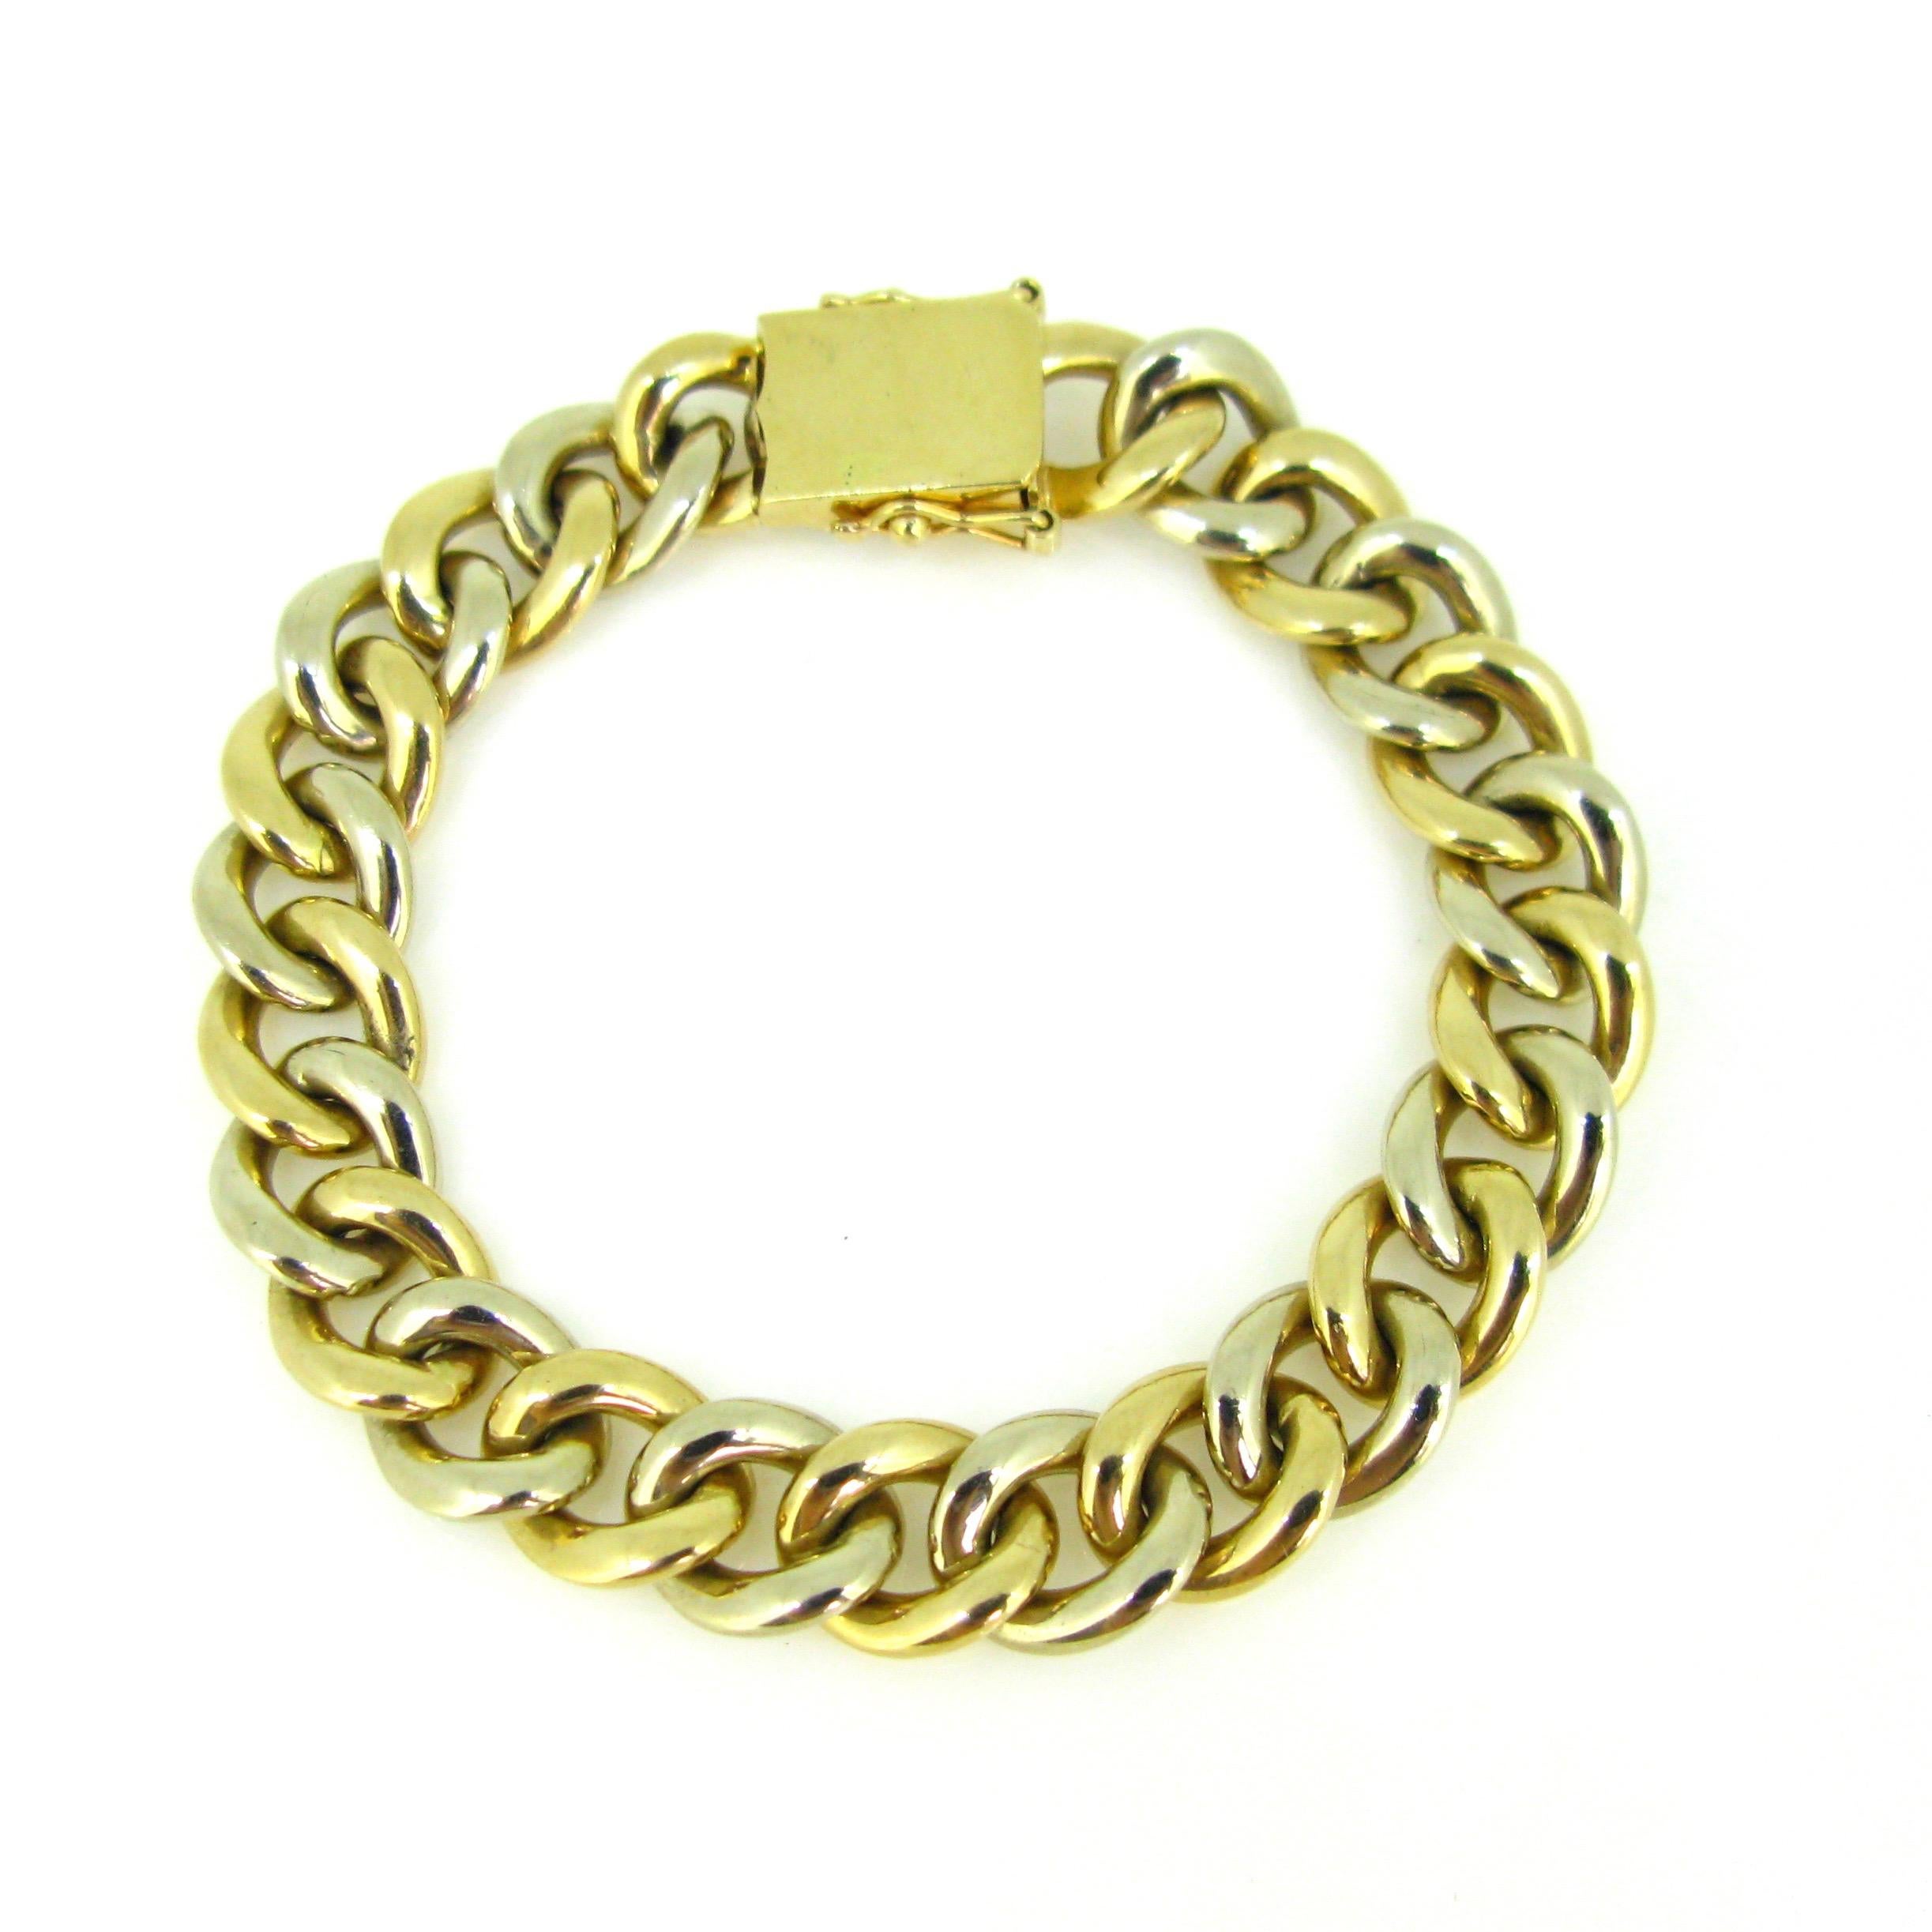 This vintage bracelet is fully made in 18kt solid gold. It weighs 59,1gr and it is in very good condition. 13 curb Links are adorned with brilliant cut diamonds. There is an approximate total carat weight of 1.5ct. The bracelet is very easy to wear